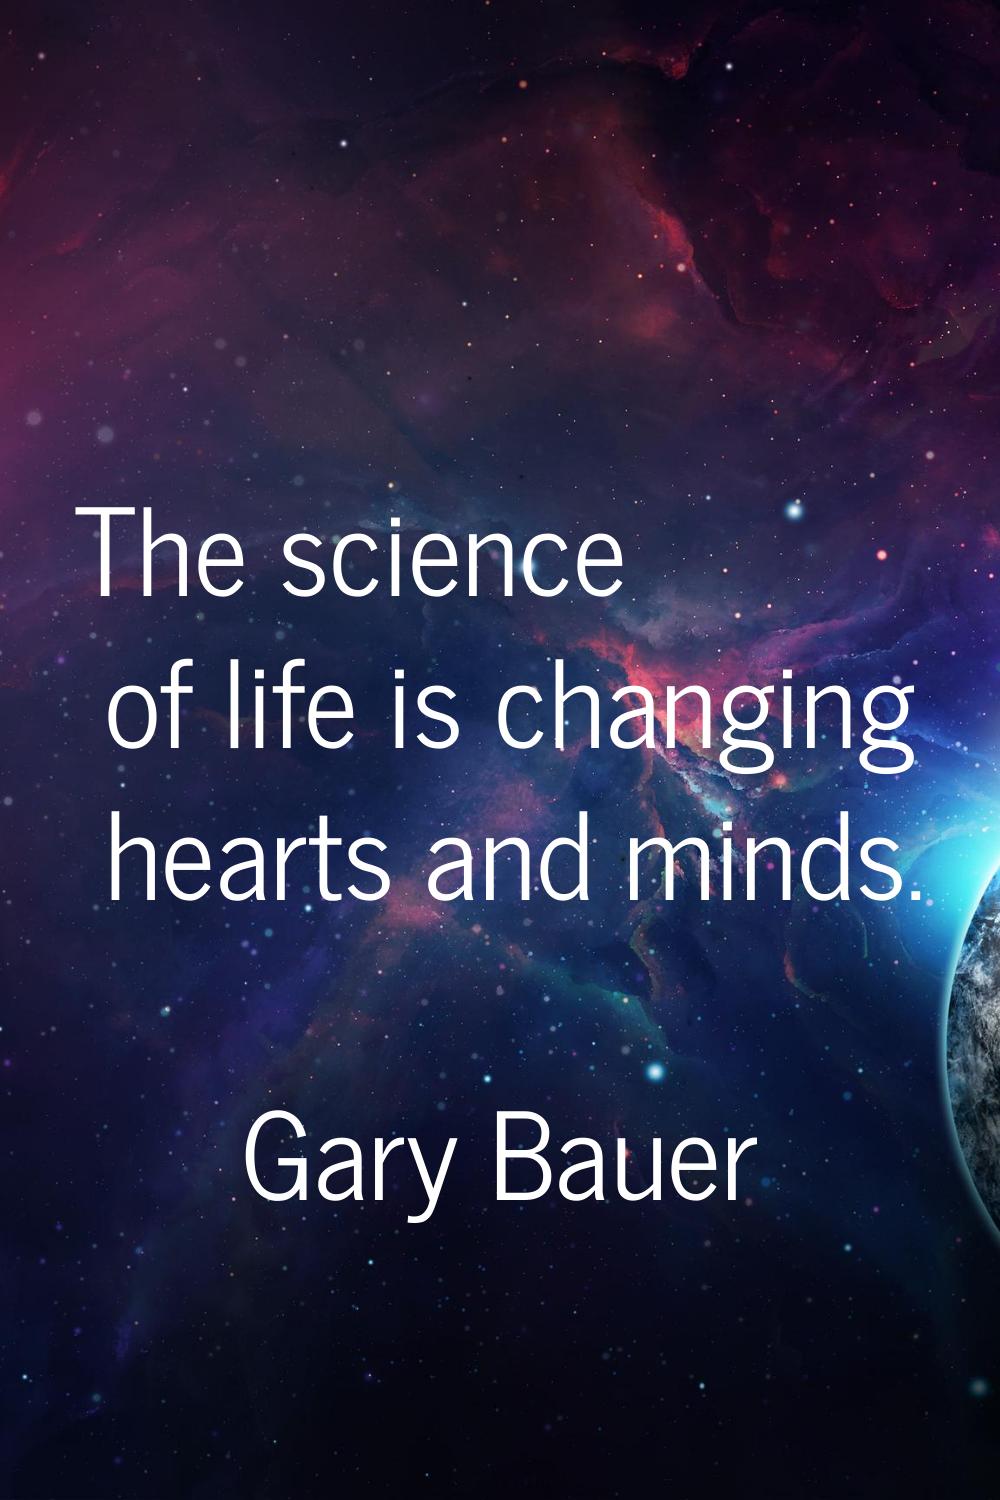 The science of life is changing hearts and minds.